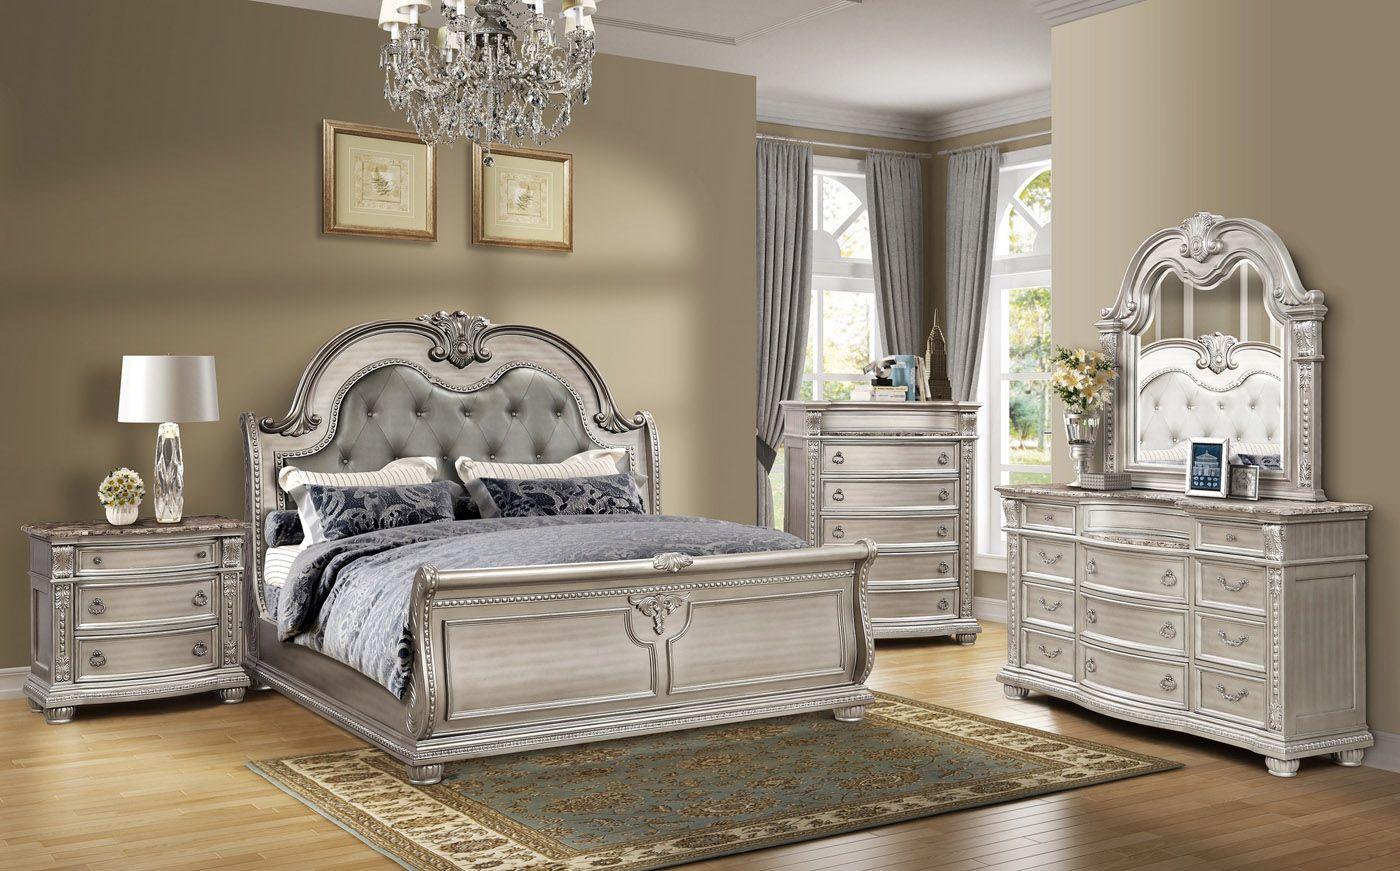 Classic, Traditional Sleigh Bedroom Set B9506 B9506-CK-2NDM-5PC in Platinum Bonded Leather